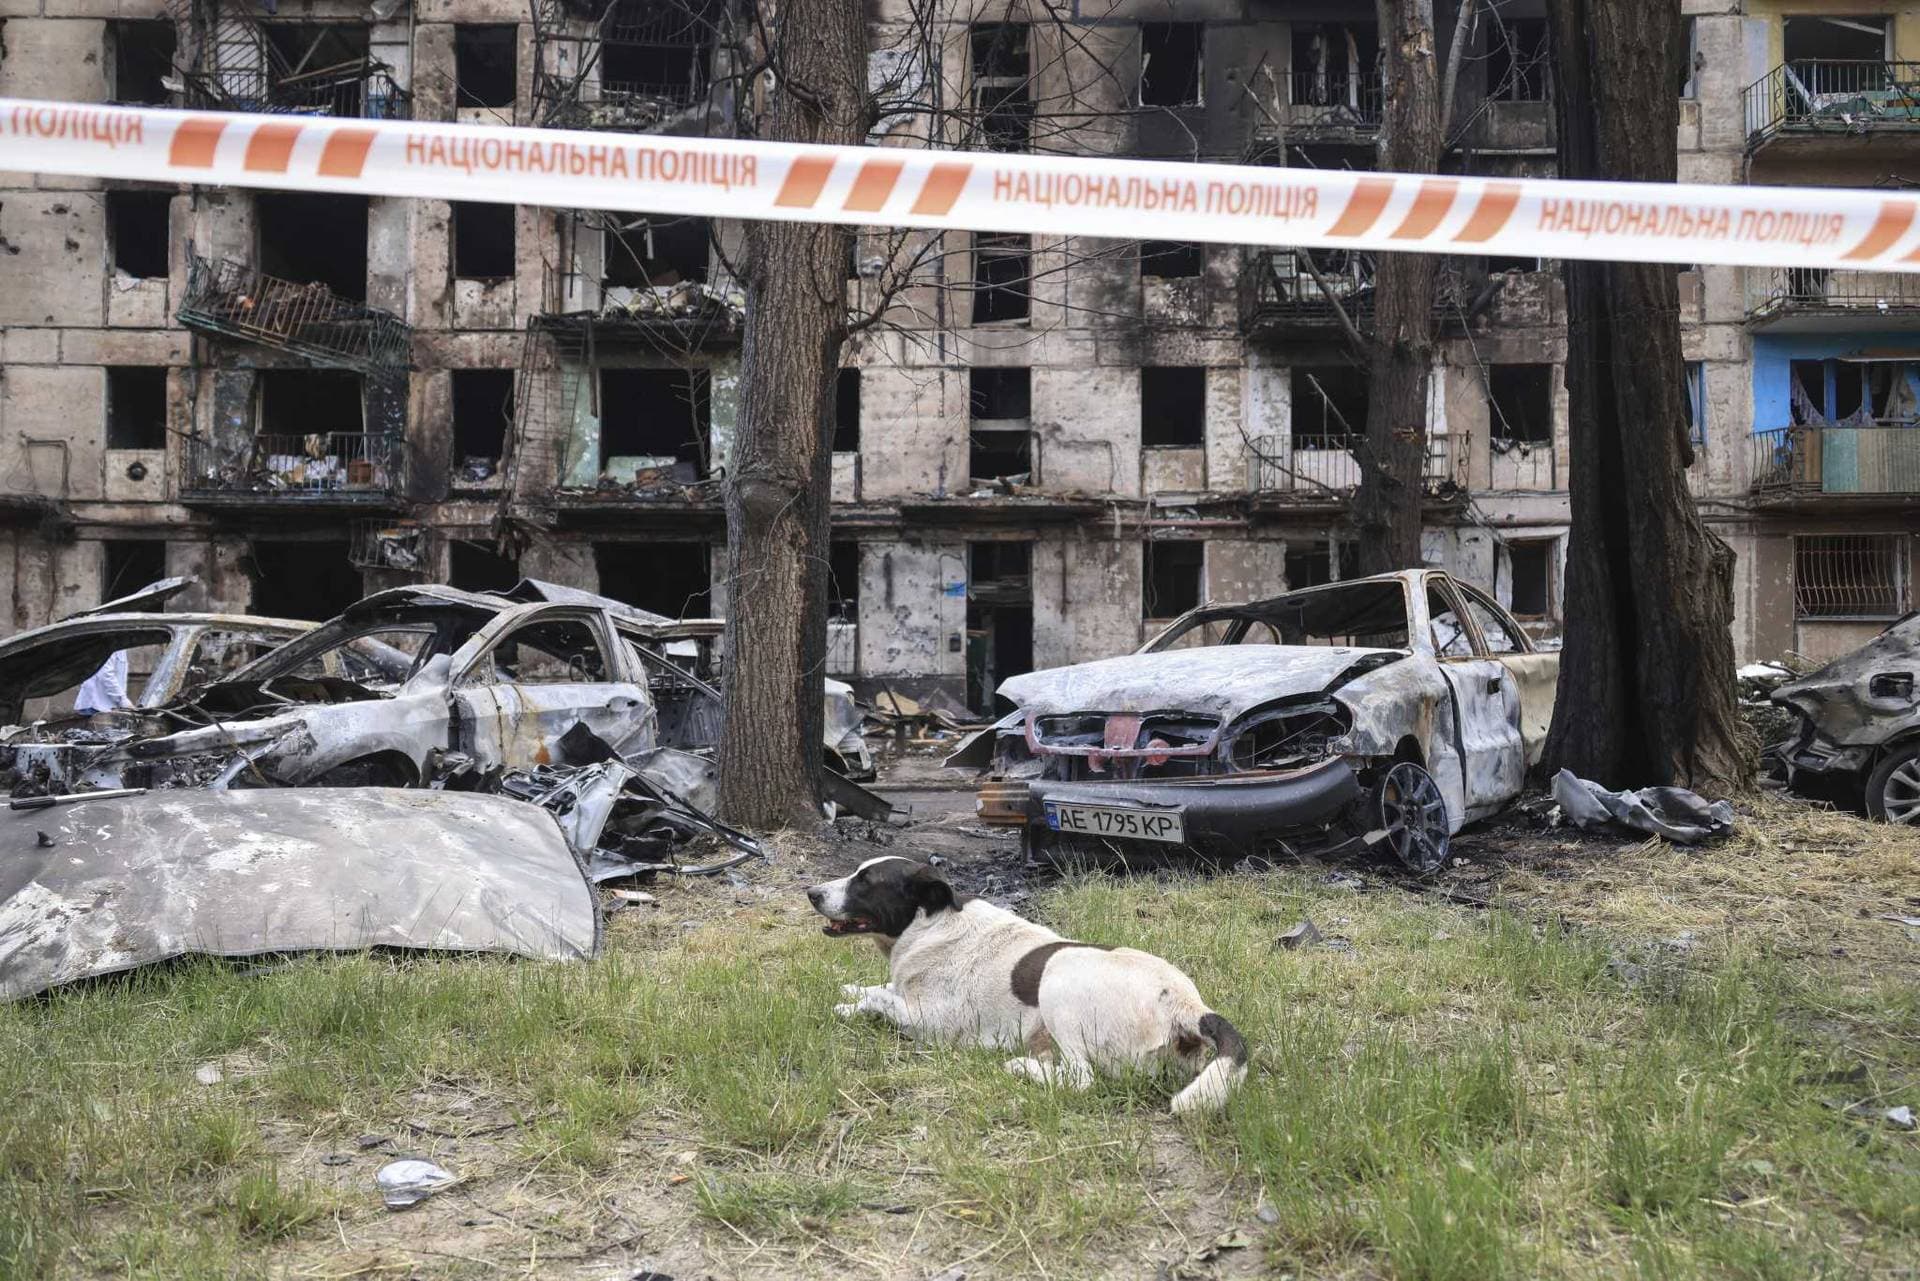 A scene of the latest Russian rocket attack that damaged a multi-storey apartment building in Kryvyi Rih